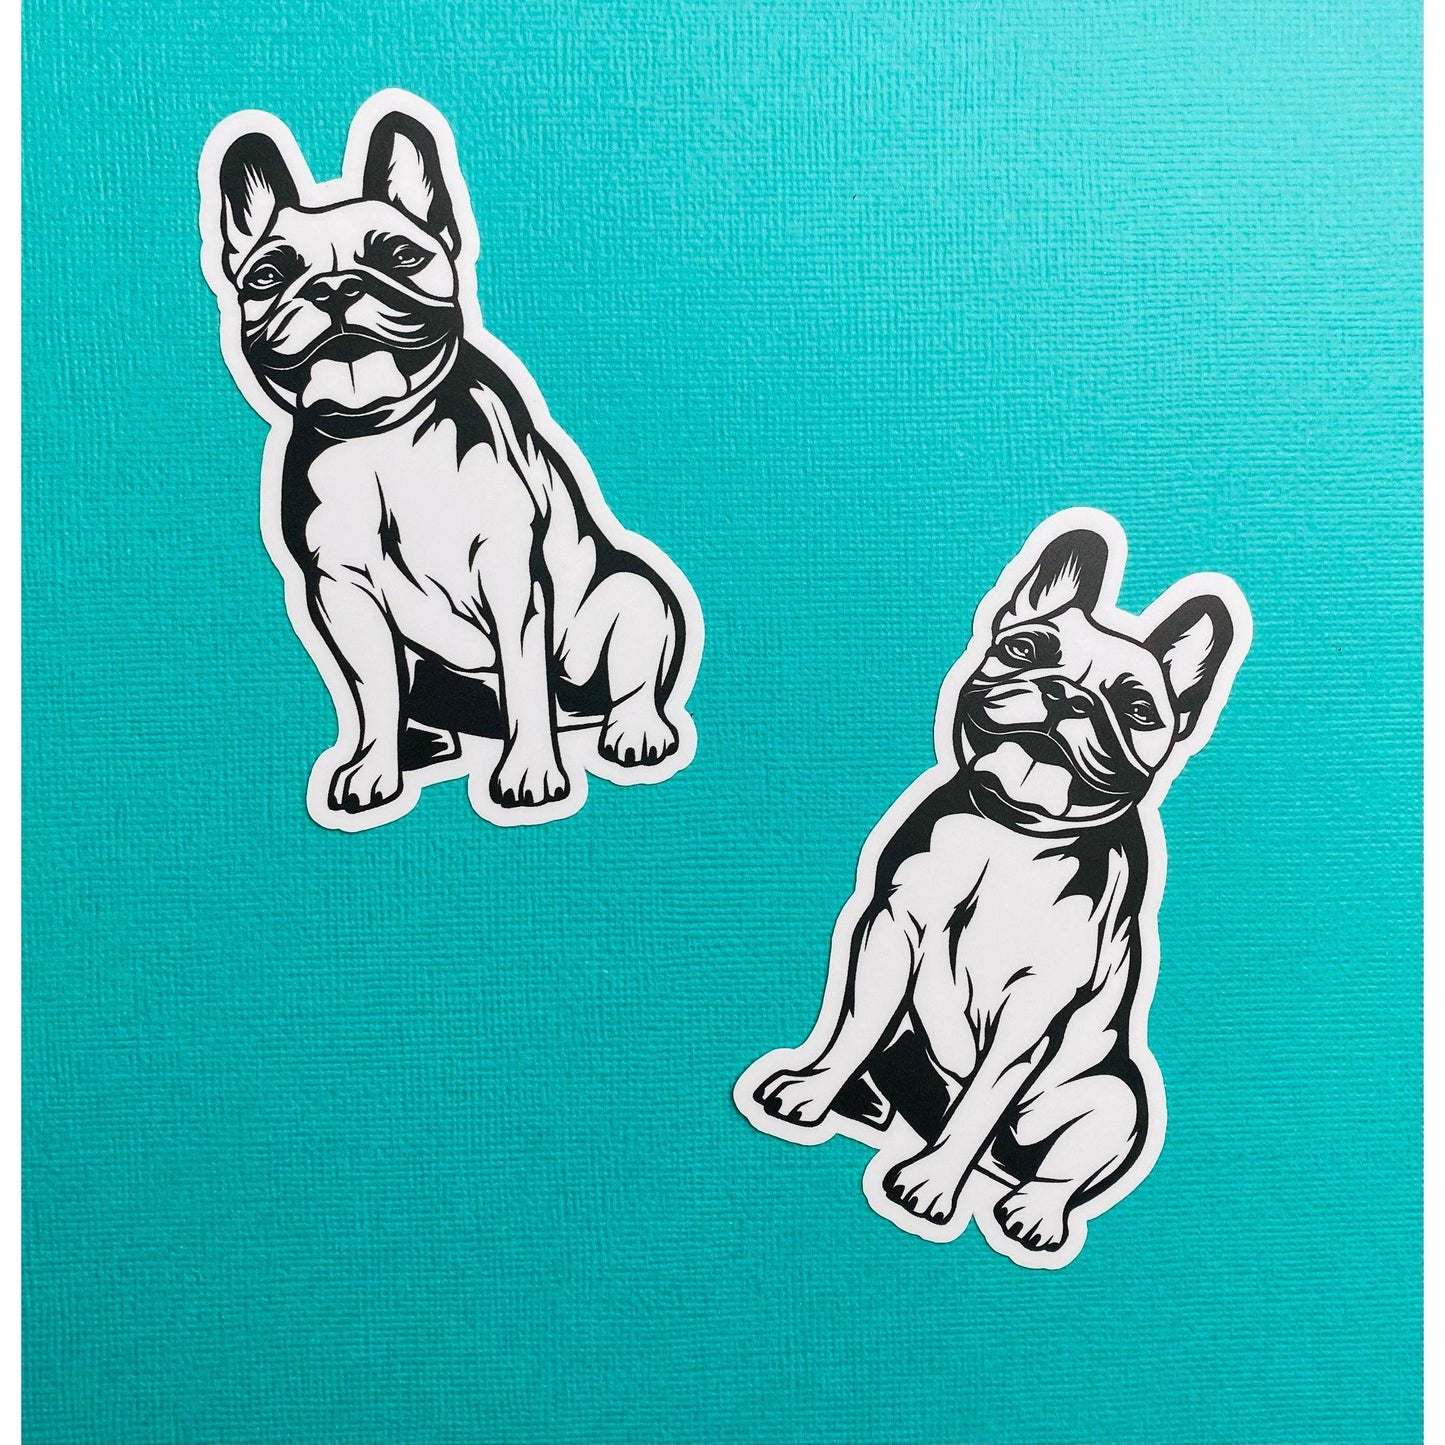 French Bulldog Sticker Black & White Frenchie Bulldog Dog Decal for Car, Water Bottle, Perfect French Bulldog Gift - Ottos Grotto :: Stickers For Your Stuff